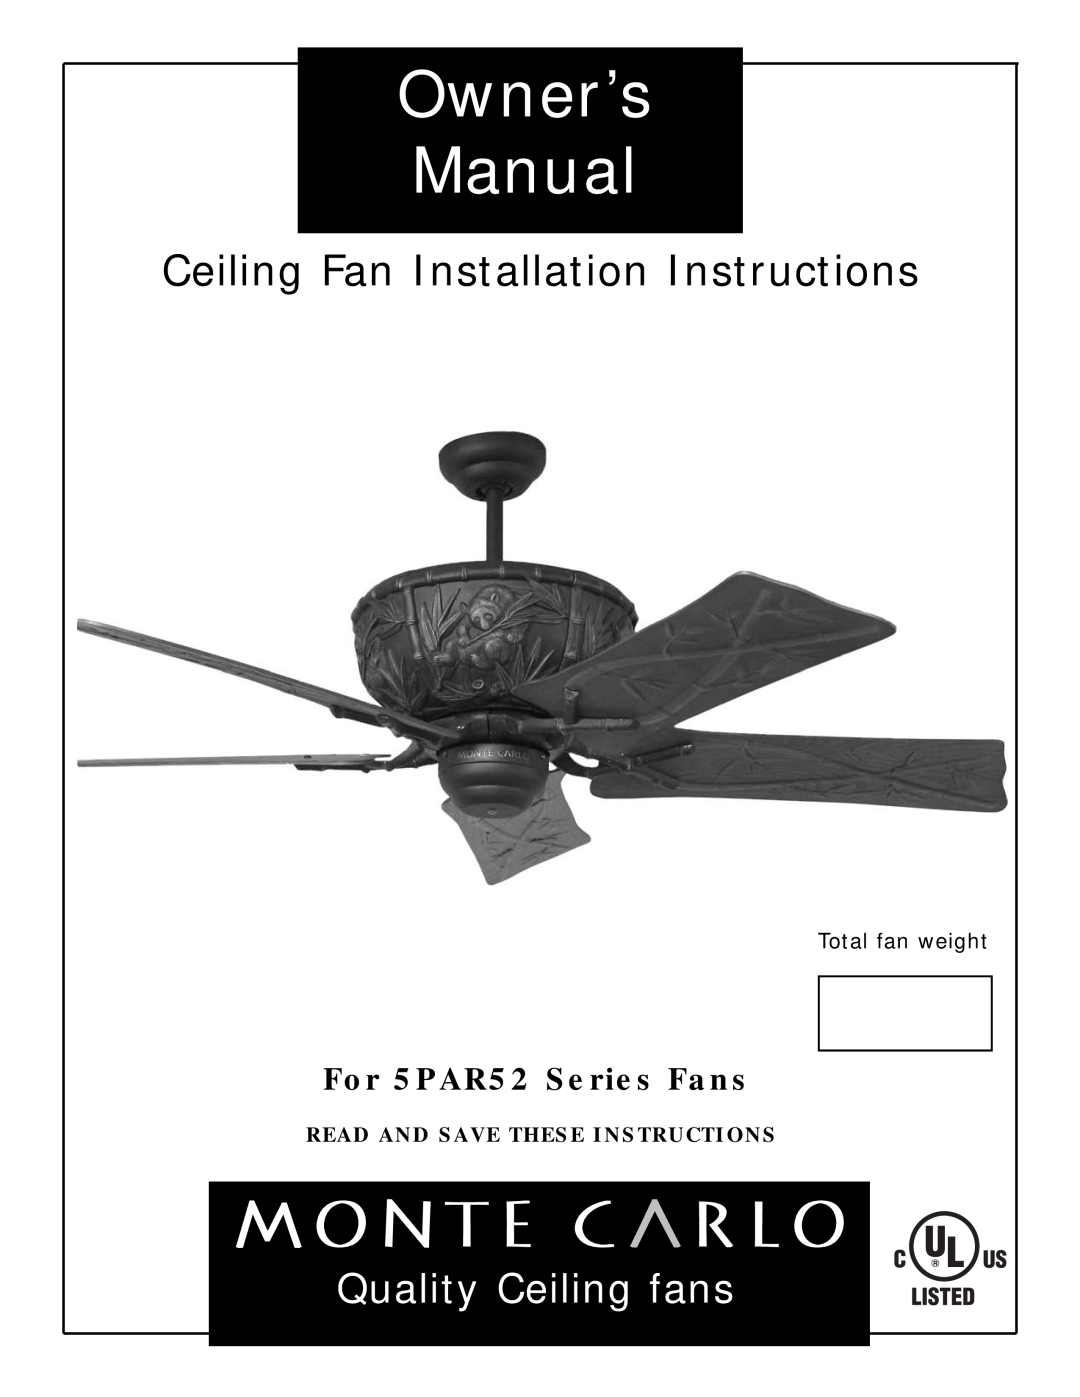 Monte Carlo Fan Company 5PAR52 owner manual Read And Save These Instructions, Ceiling Fan Installation Instructions 